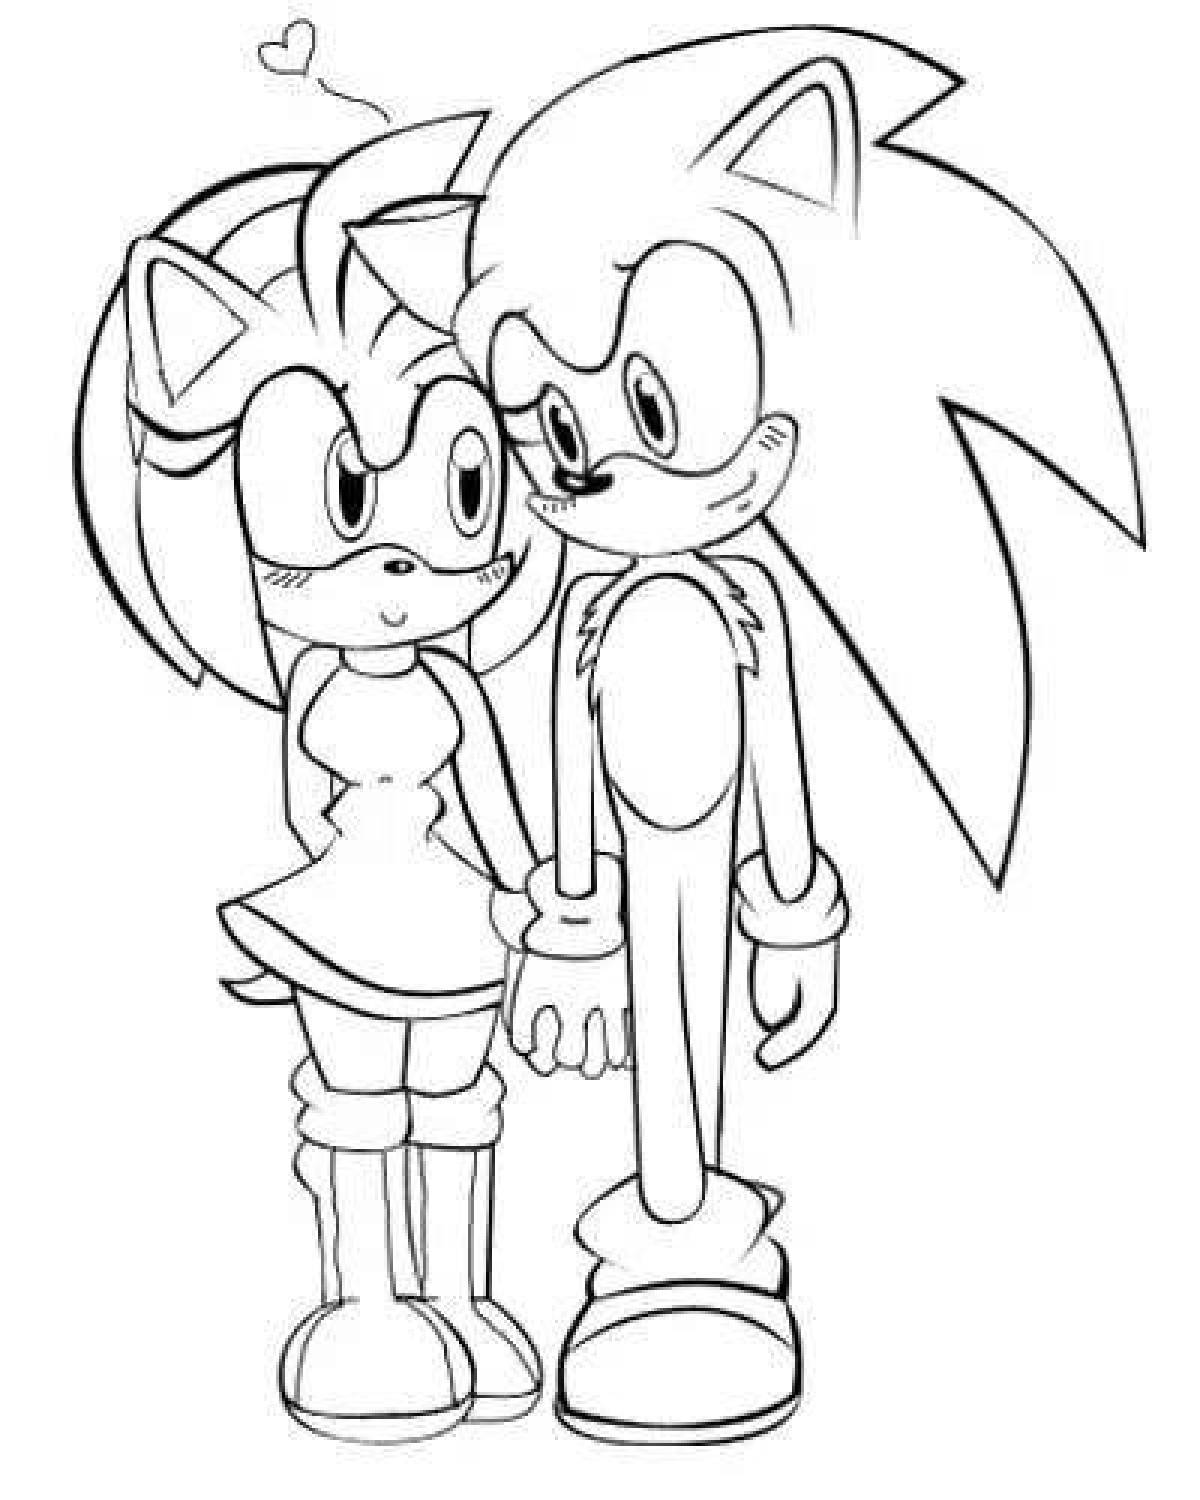 Sonic and amy rose #3